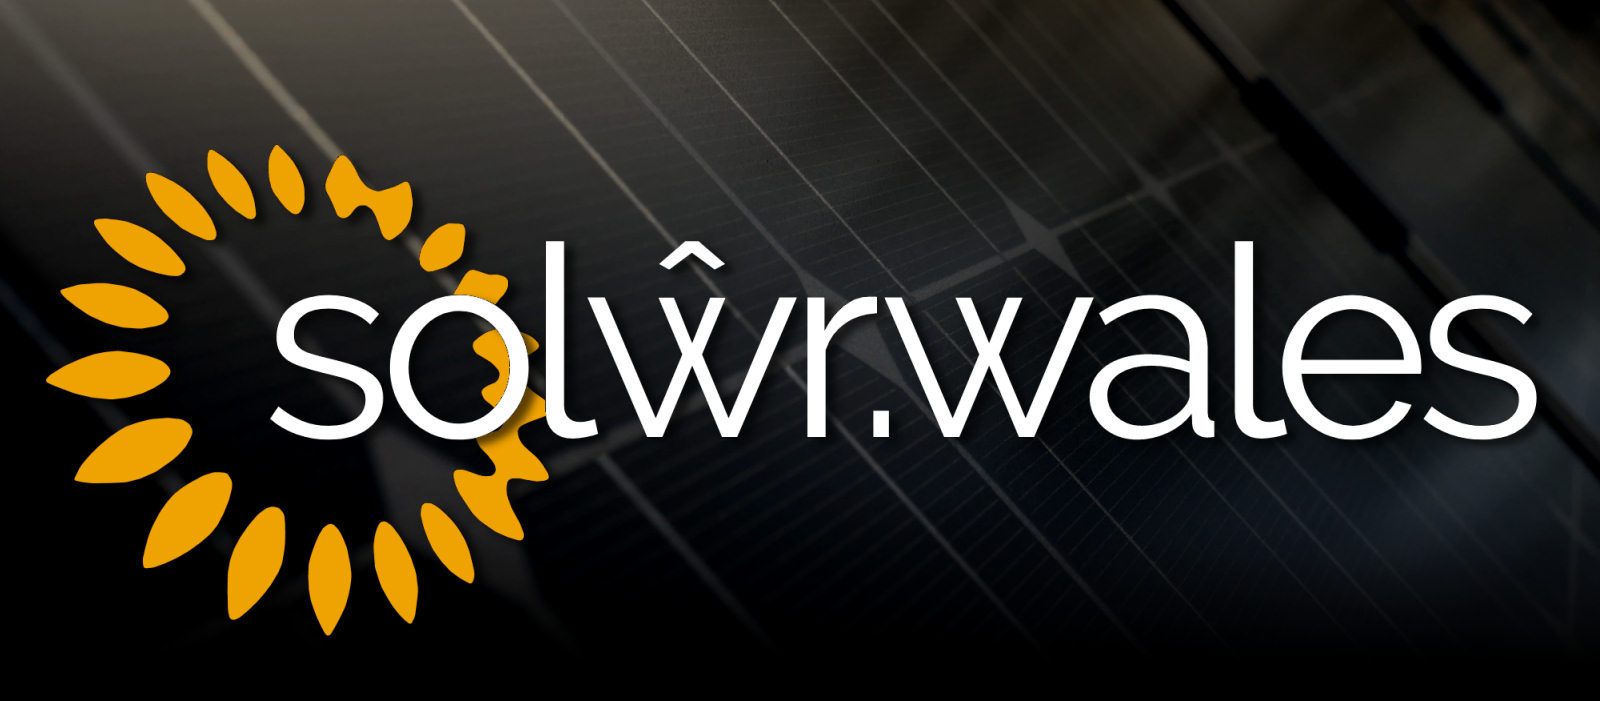 Solwr Wales PV motif - Energy for Wales, blue skies not required!